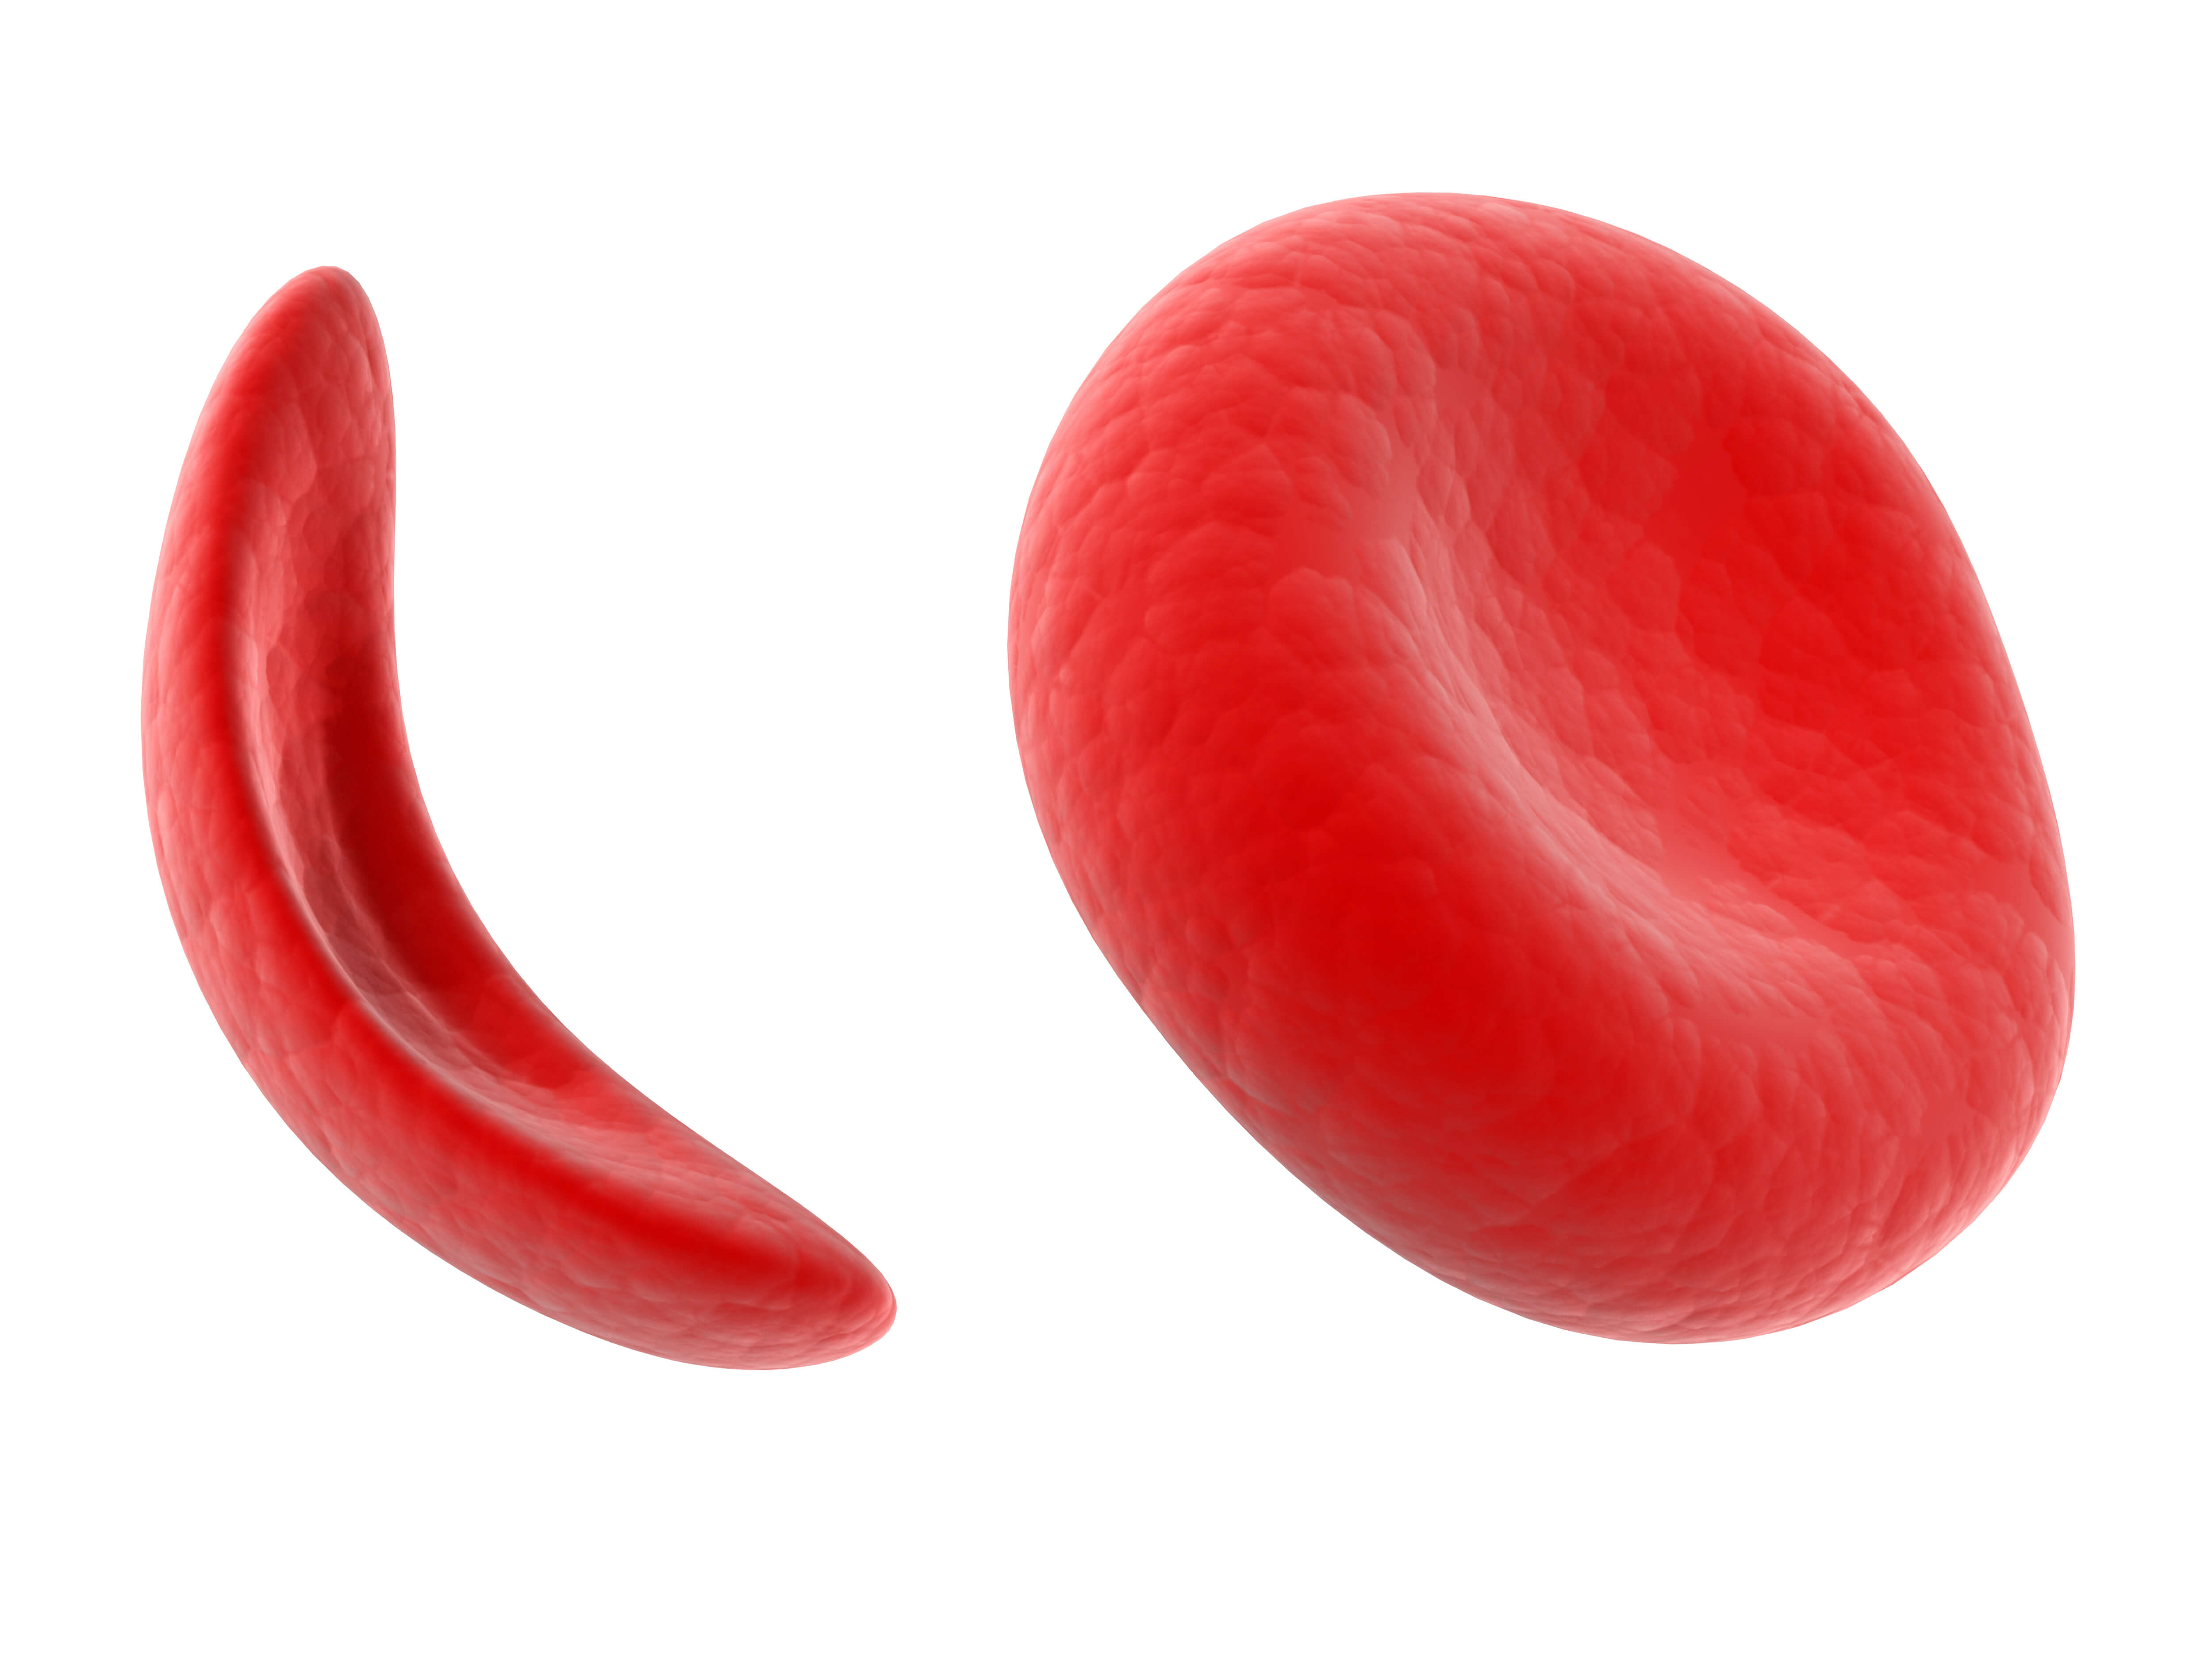 Sickle Cell Anaemia 